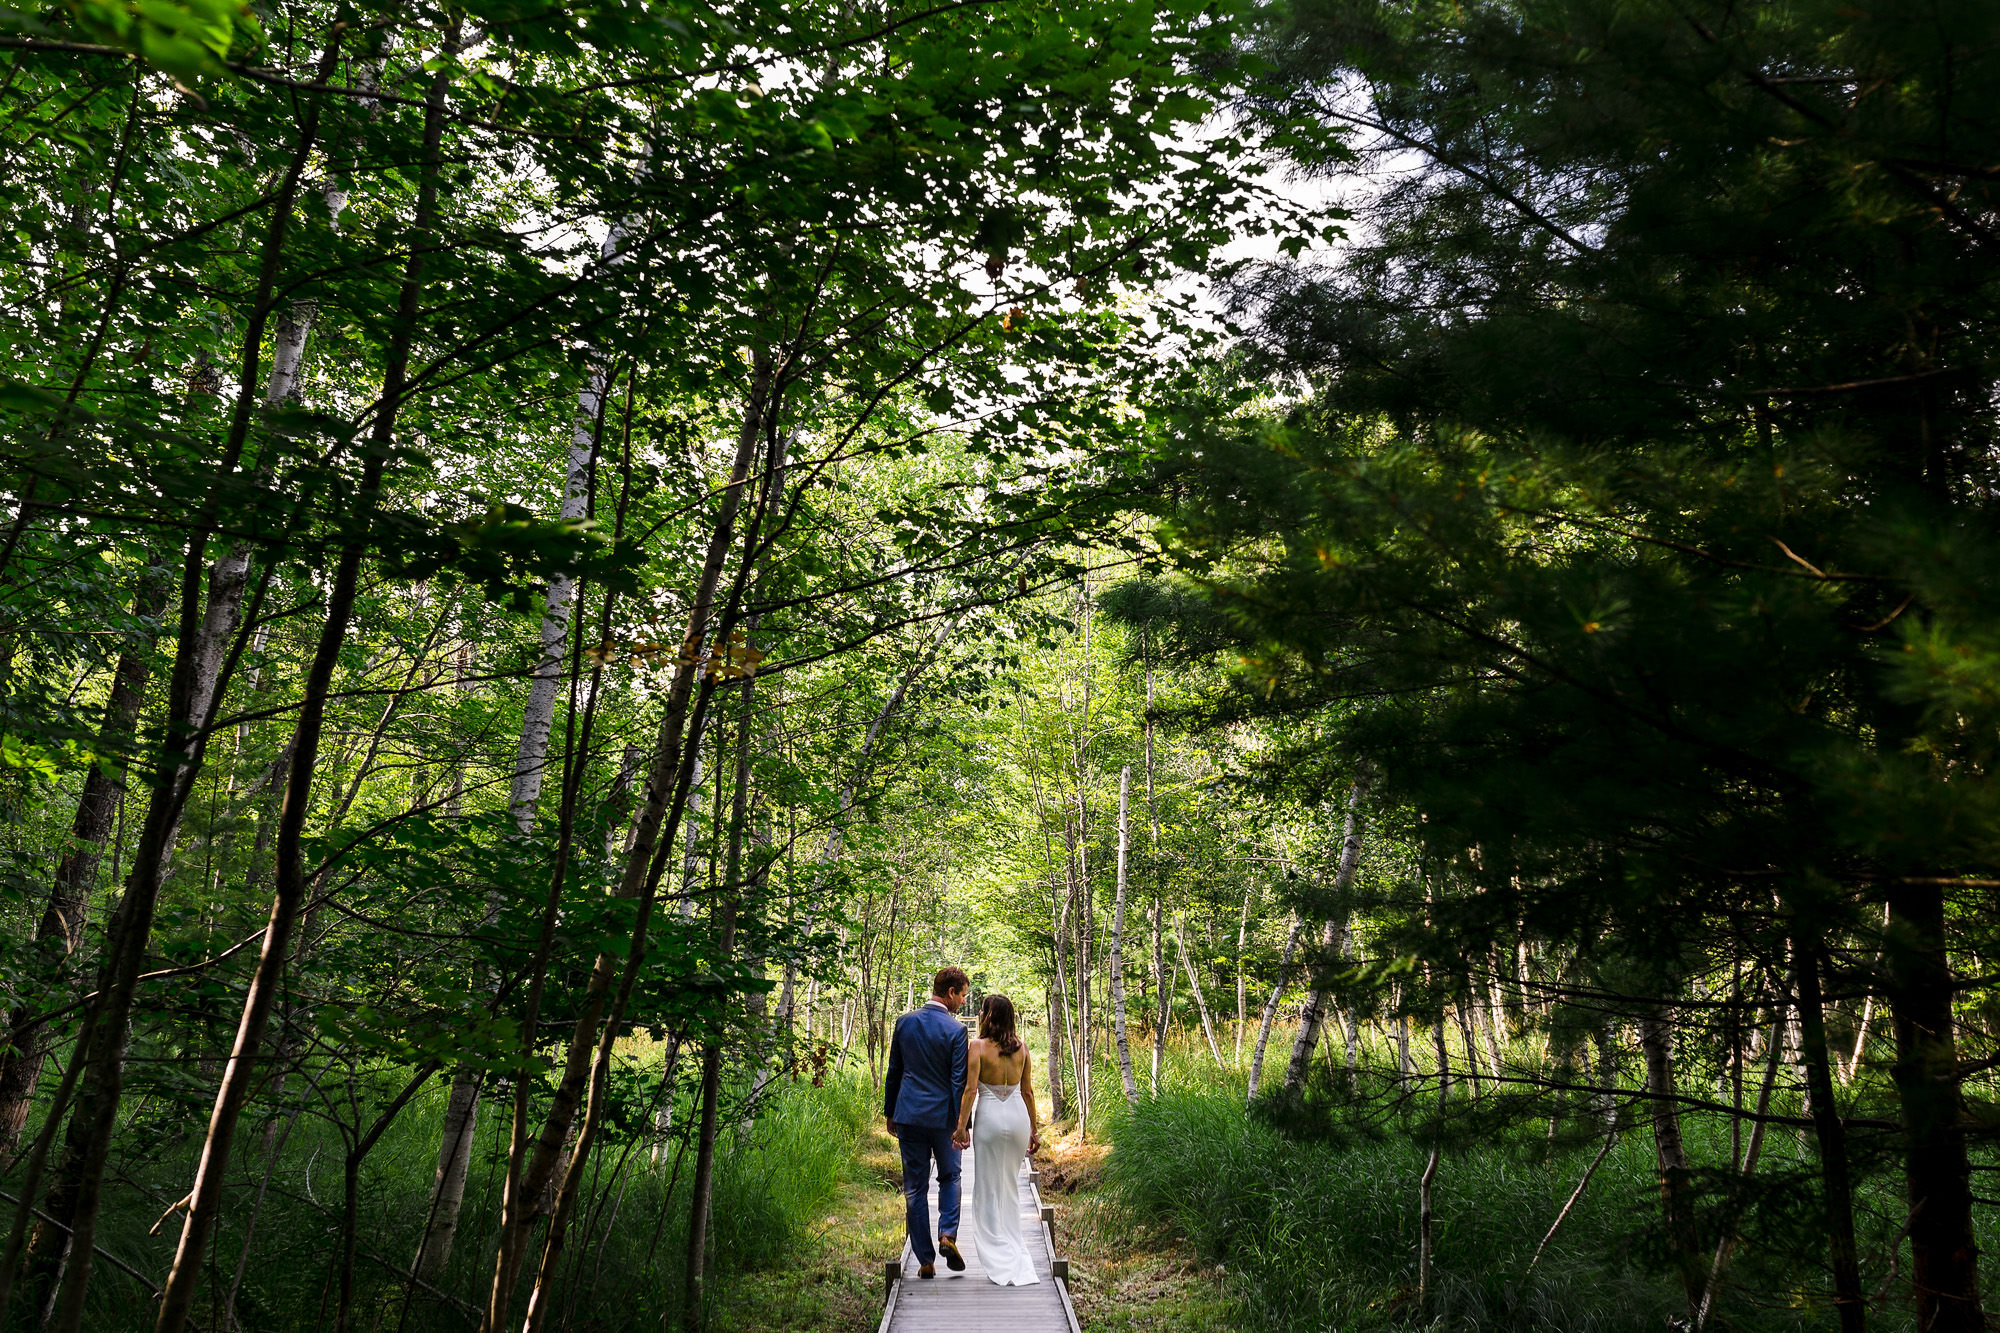 Photos of an elopement at the Jessup Path in Acadia National Park